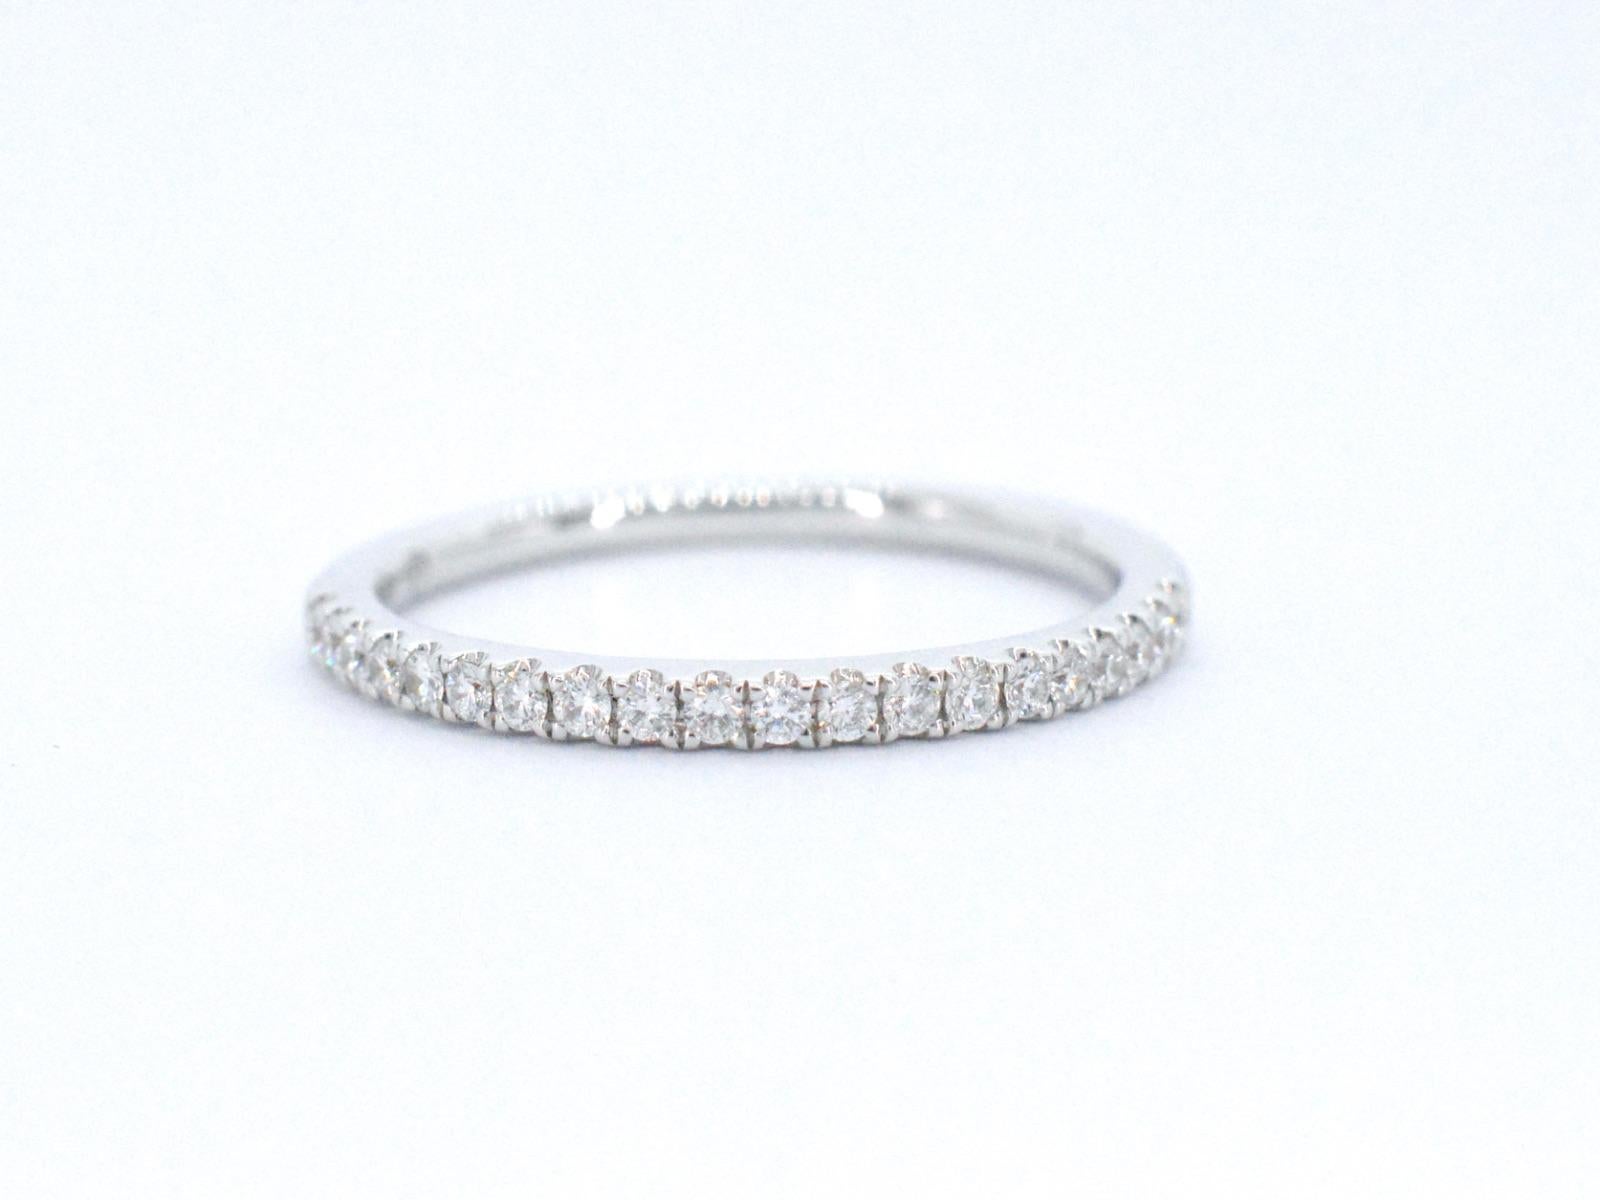 White Gold Ring with Brilliant Cut Diamond For Sale 1